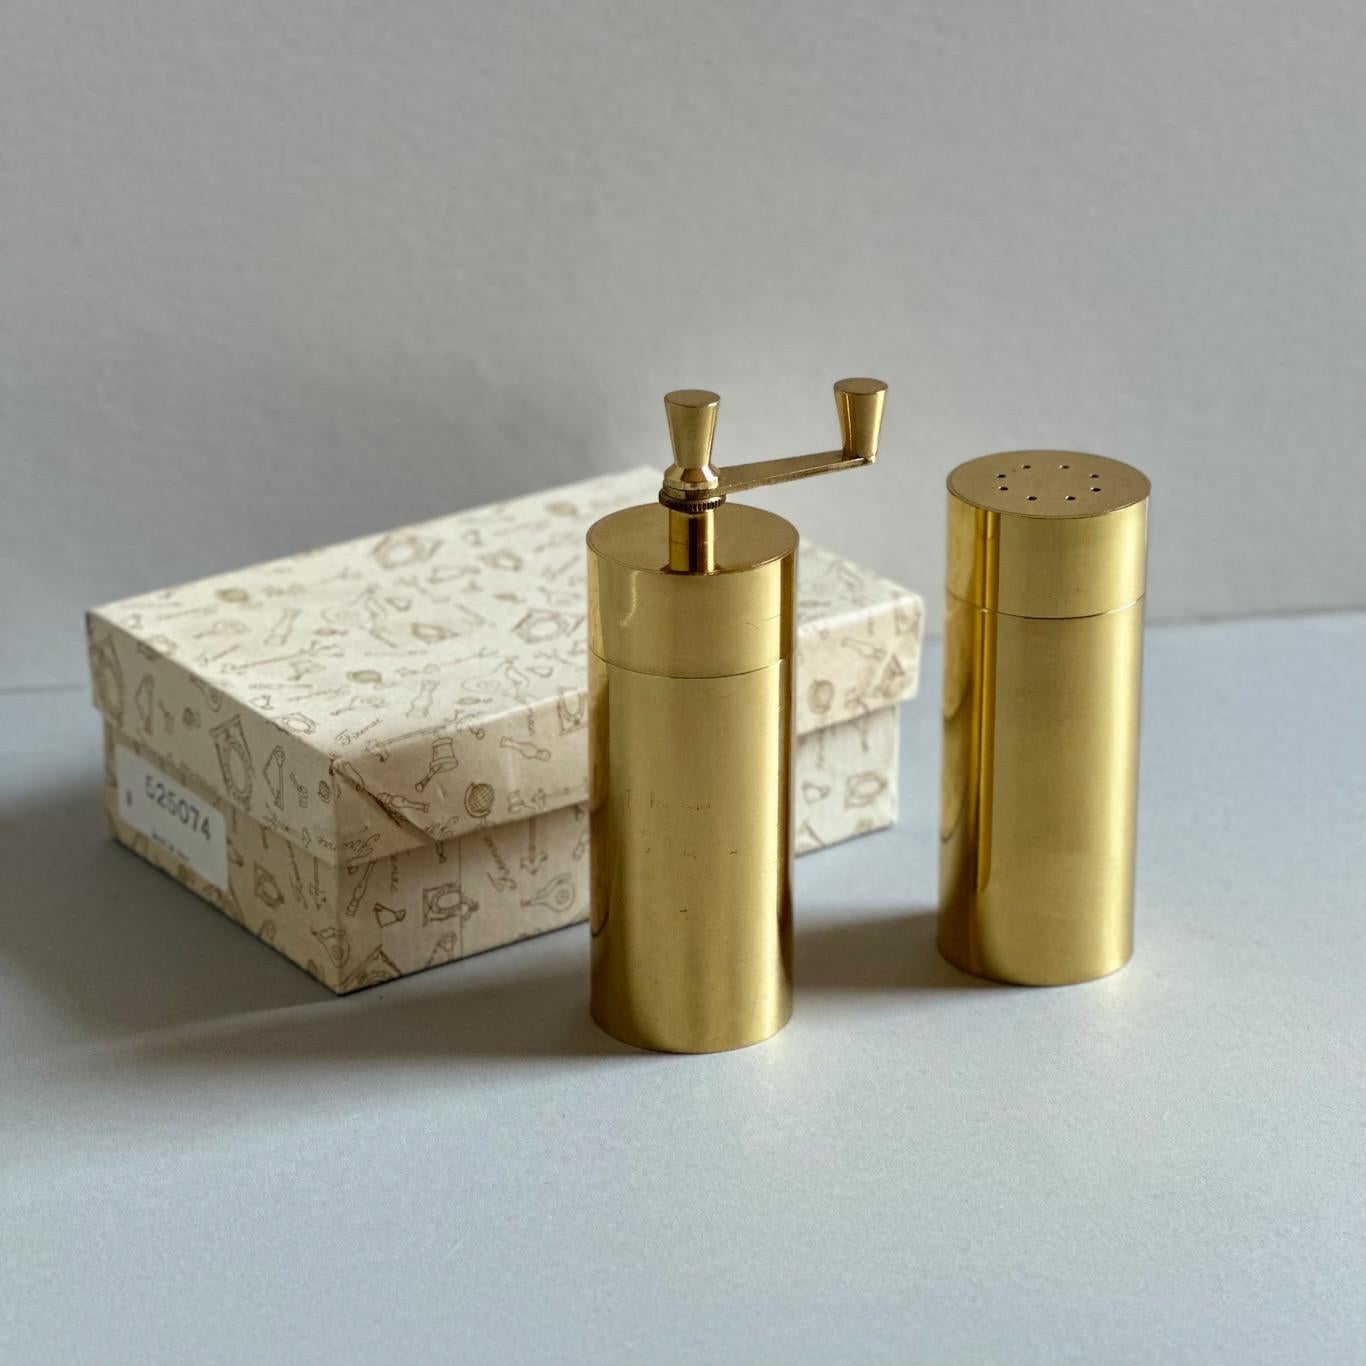 Modernist Lacquered Brass Pepper Mill and Salt Shaker, Italy, Original Box, 1960 For Sale 6